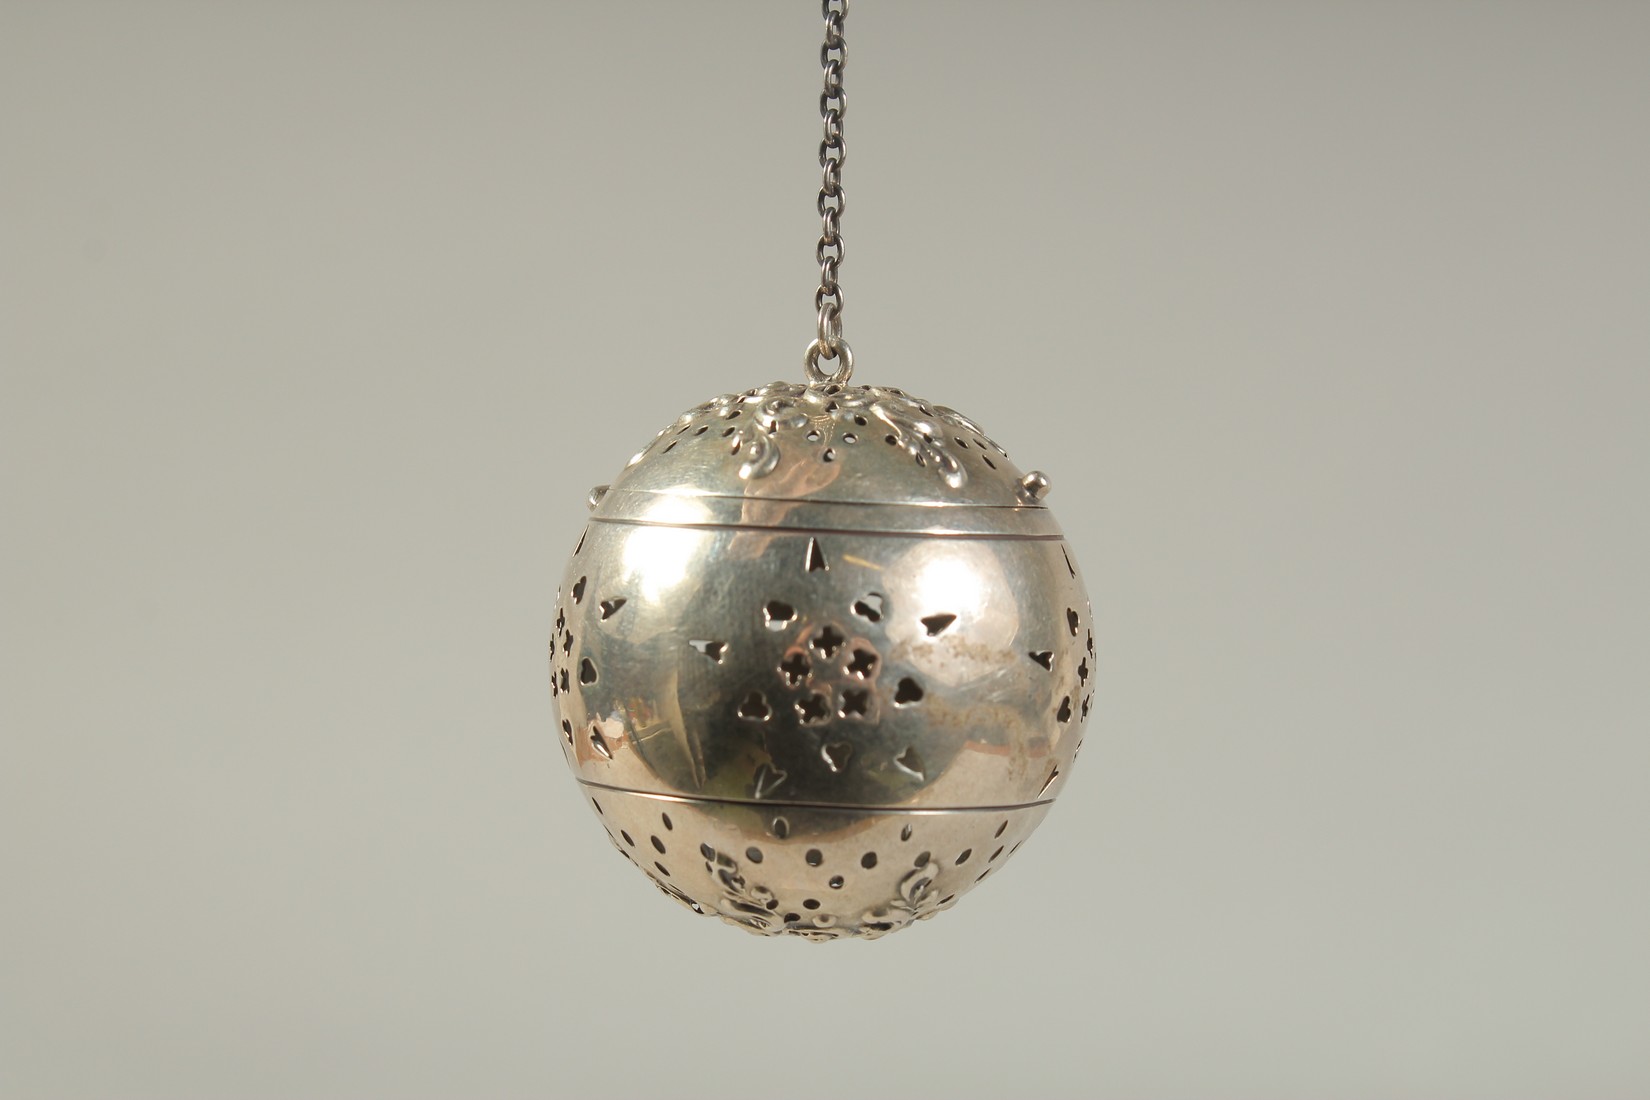 A SILVER GLOBULAR TEA INFUSER on a chain. 1.75ins diameter. - Image 2 of 4